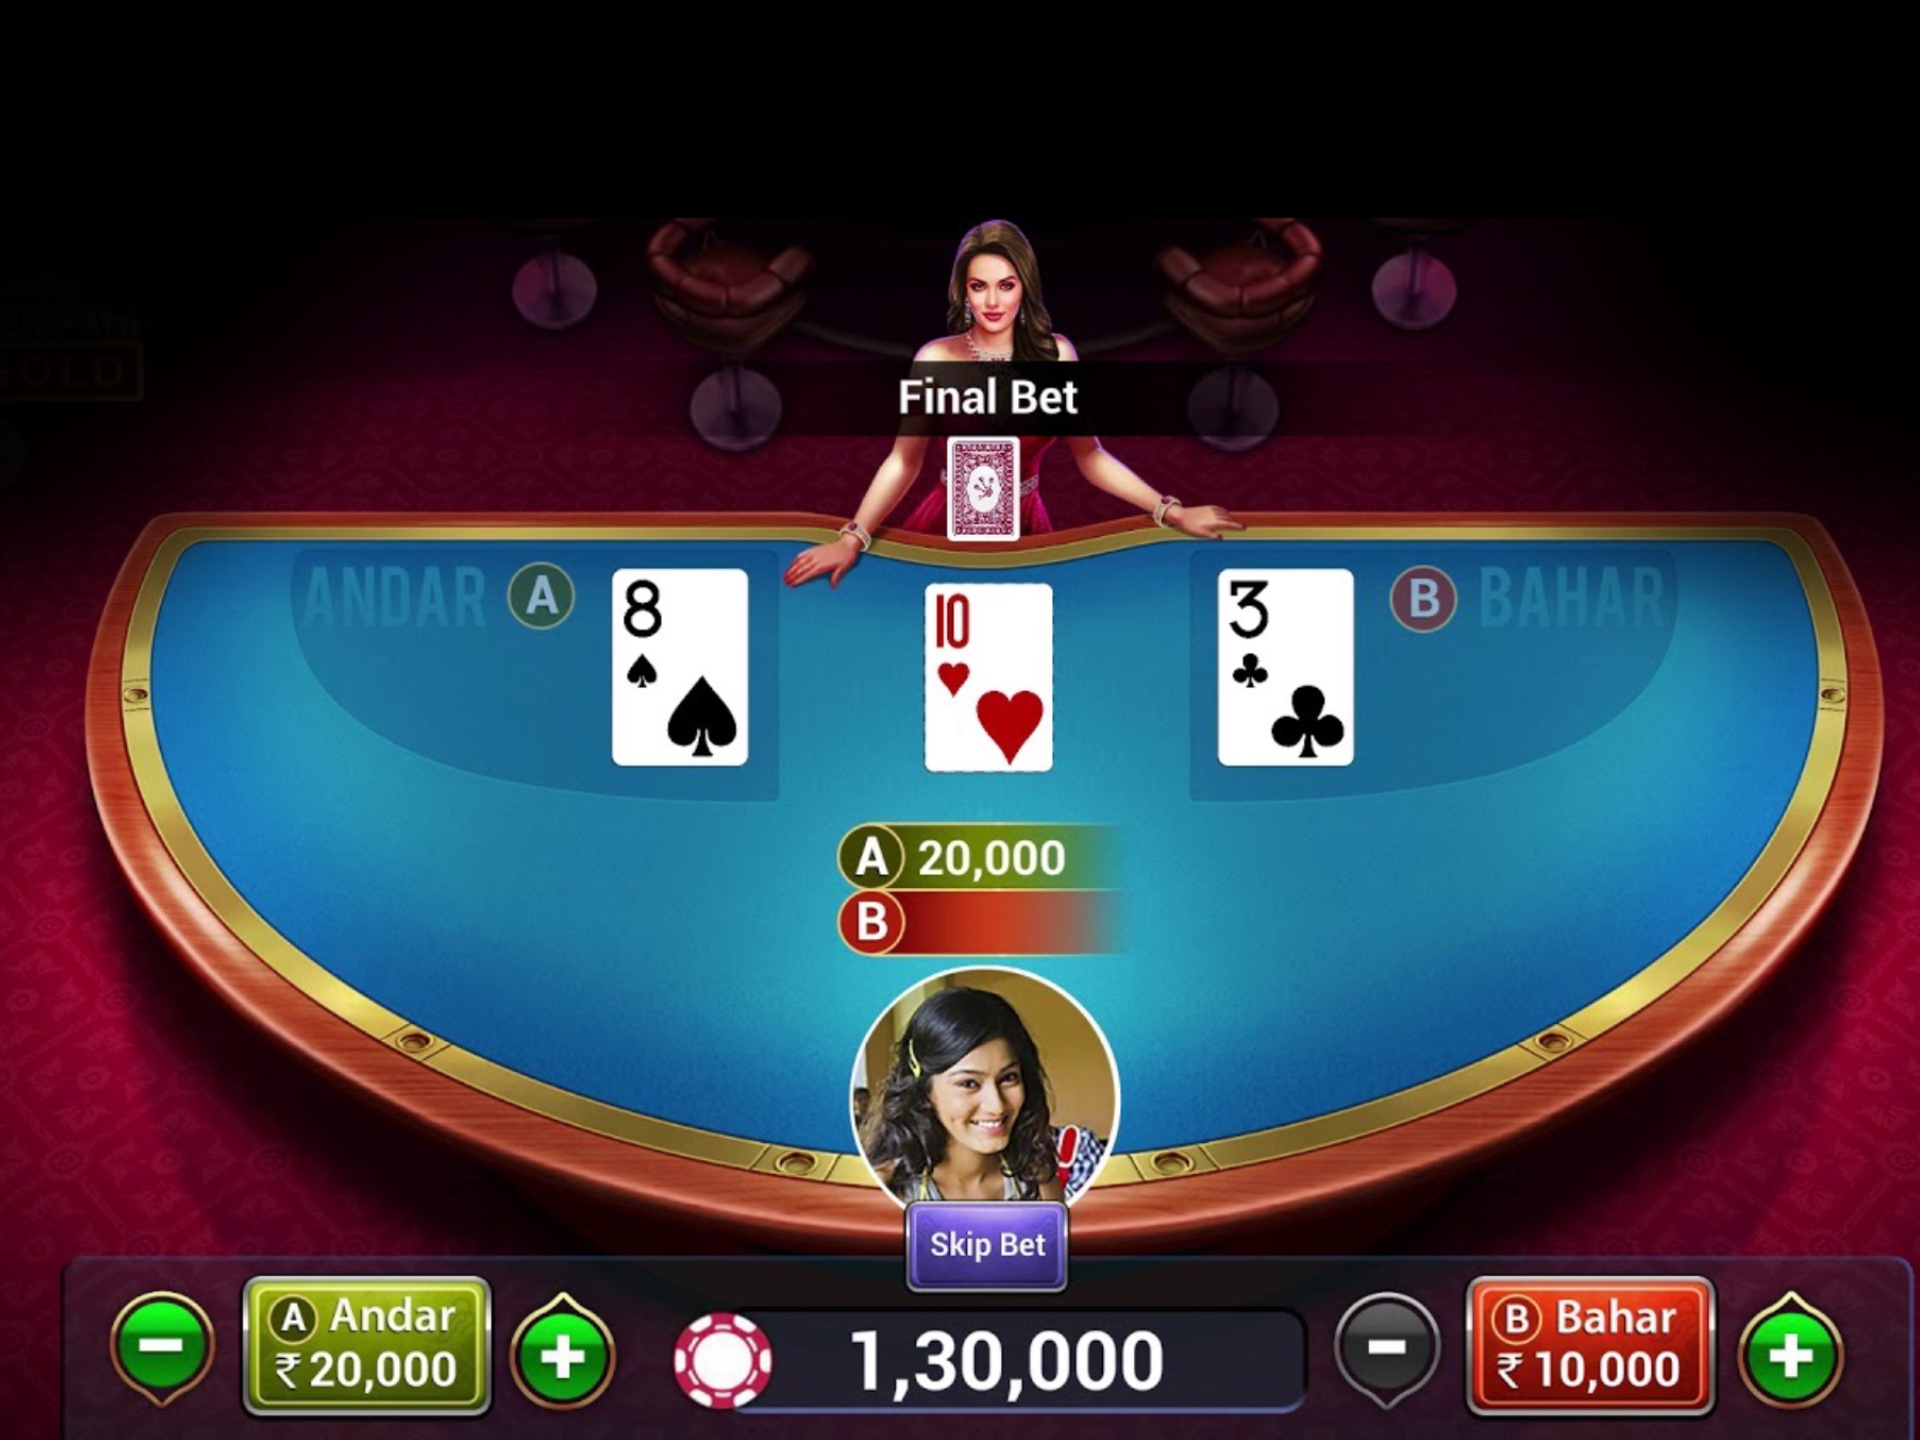 Play the traditional casino game at online casino in India.